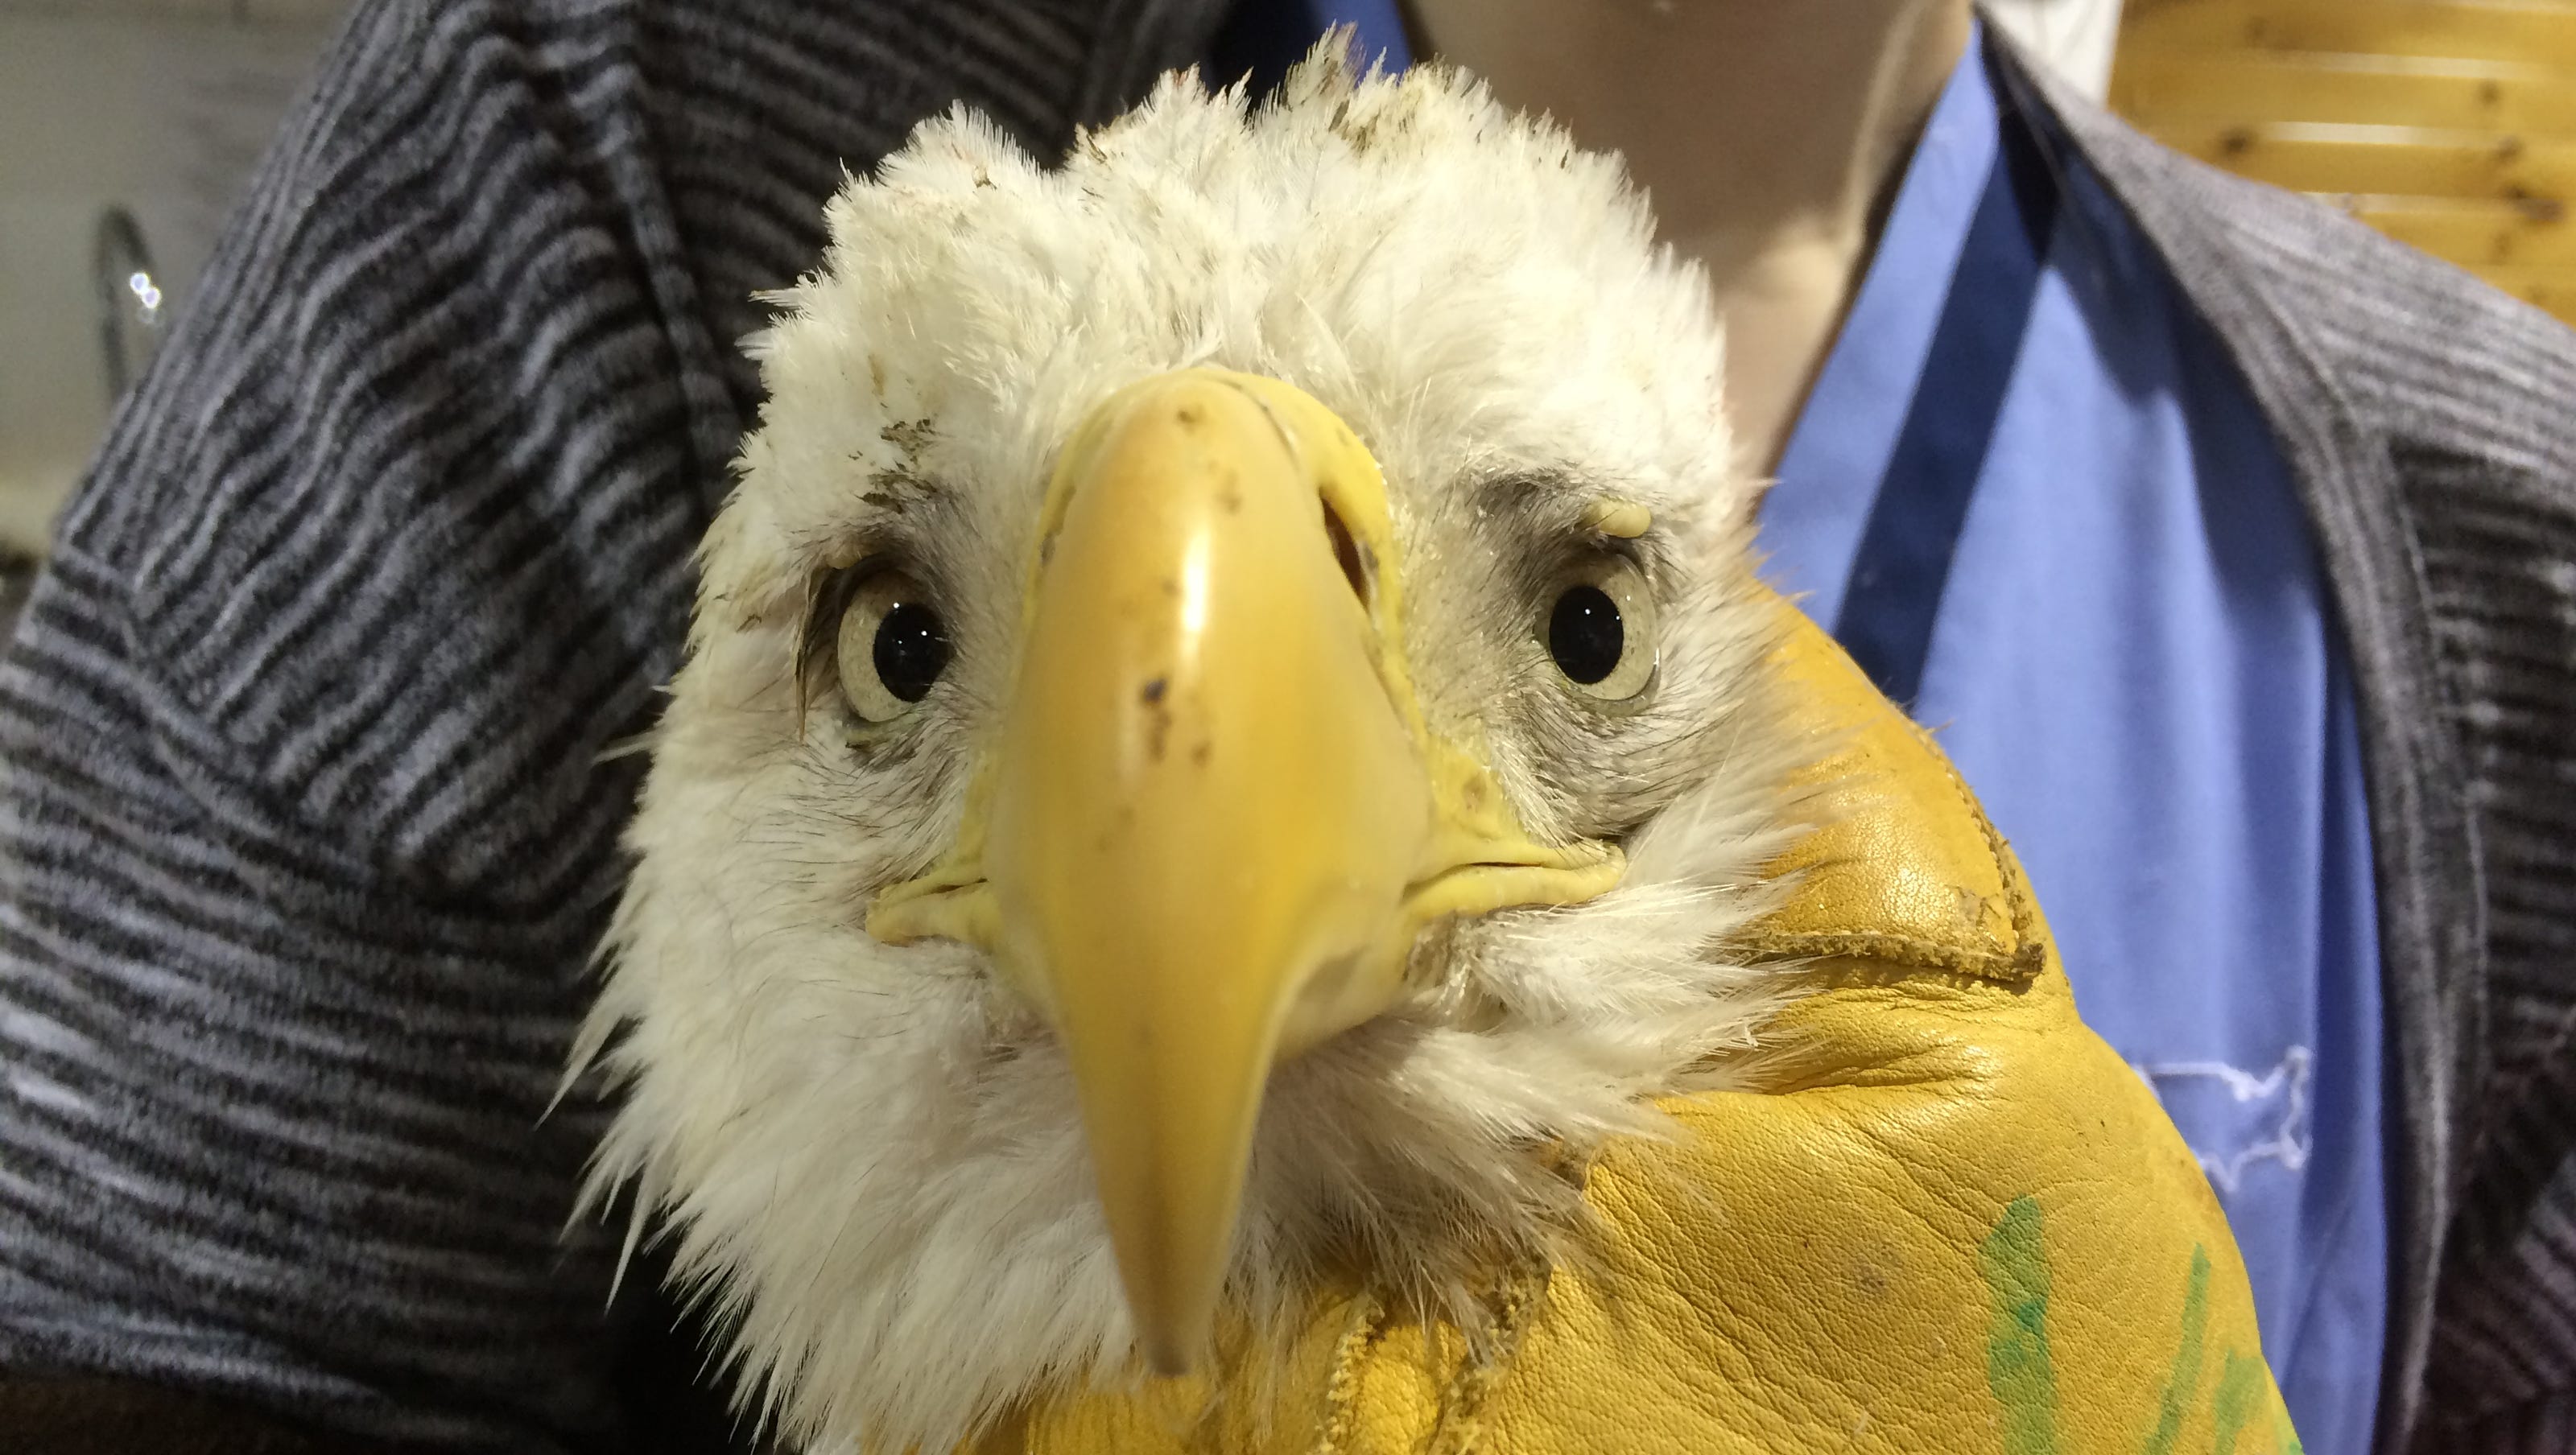 How Can Humans Prevent Bald Eagle Deaths